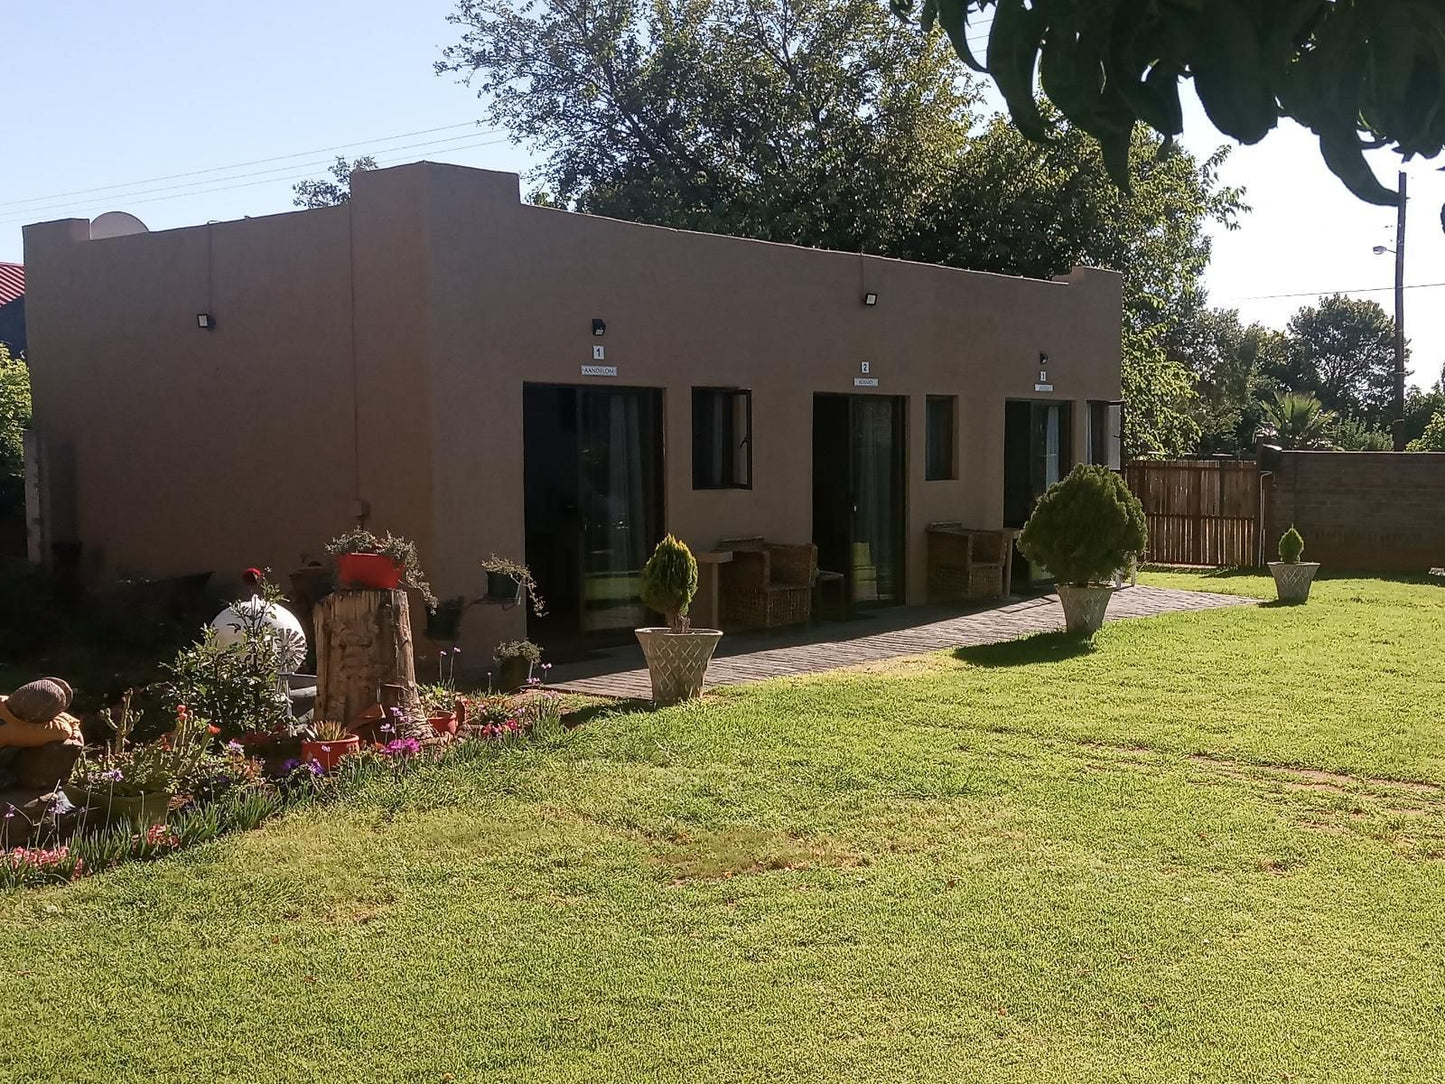 Serendipity Guest House Danielskuil Northern Cape South Africa House, Building, Architecture